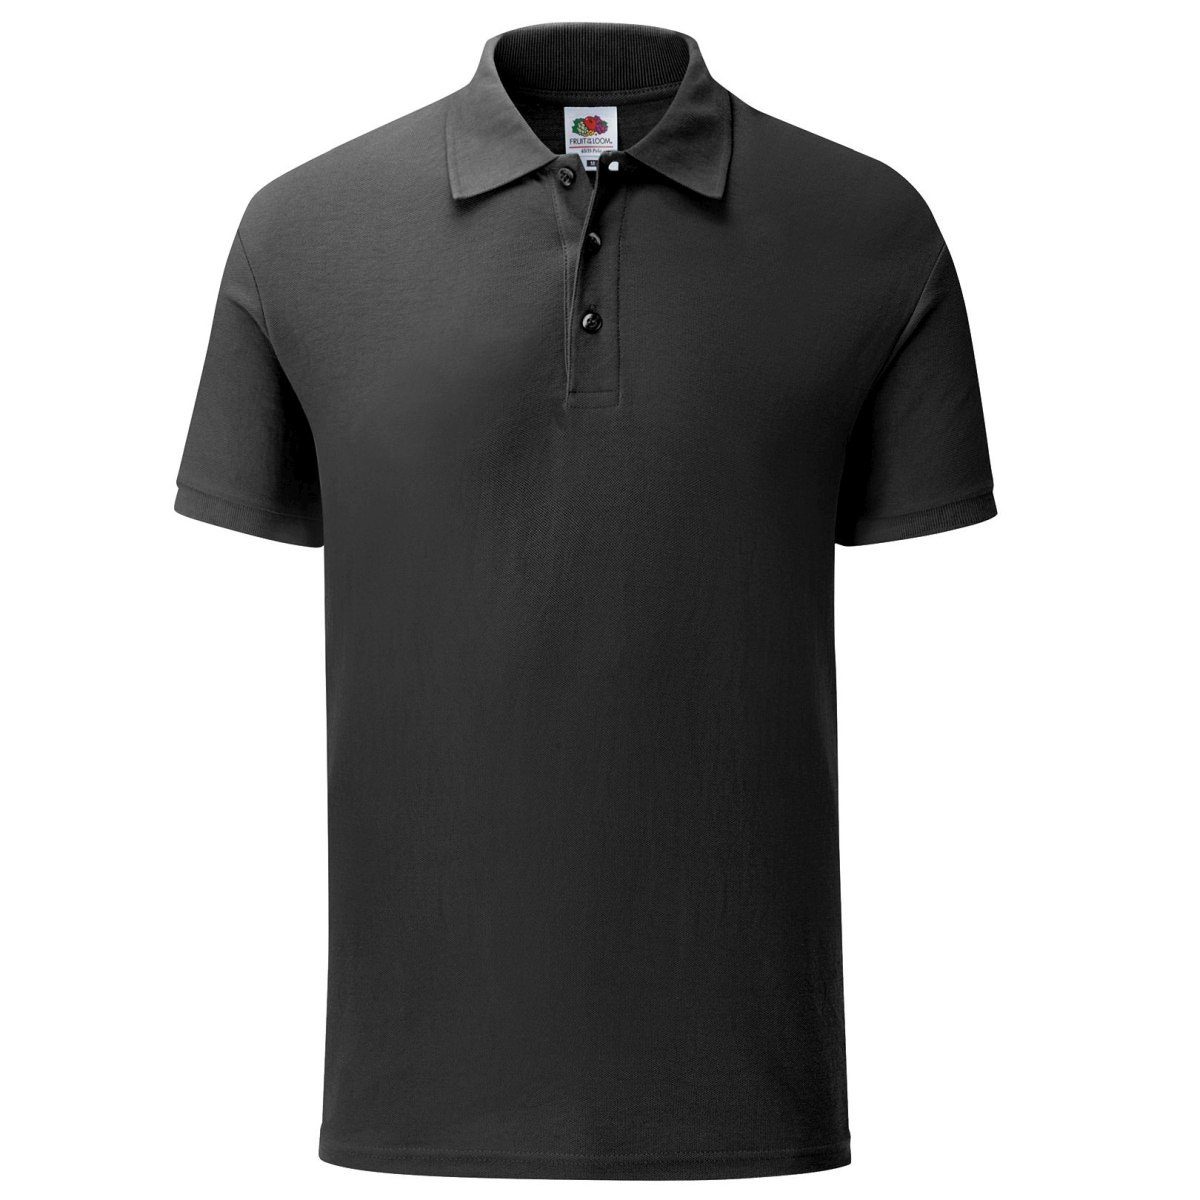 Fruit of the Loom Poloshirt Fruit of the Loom 65/35 Tailored Fit schwarz